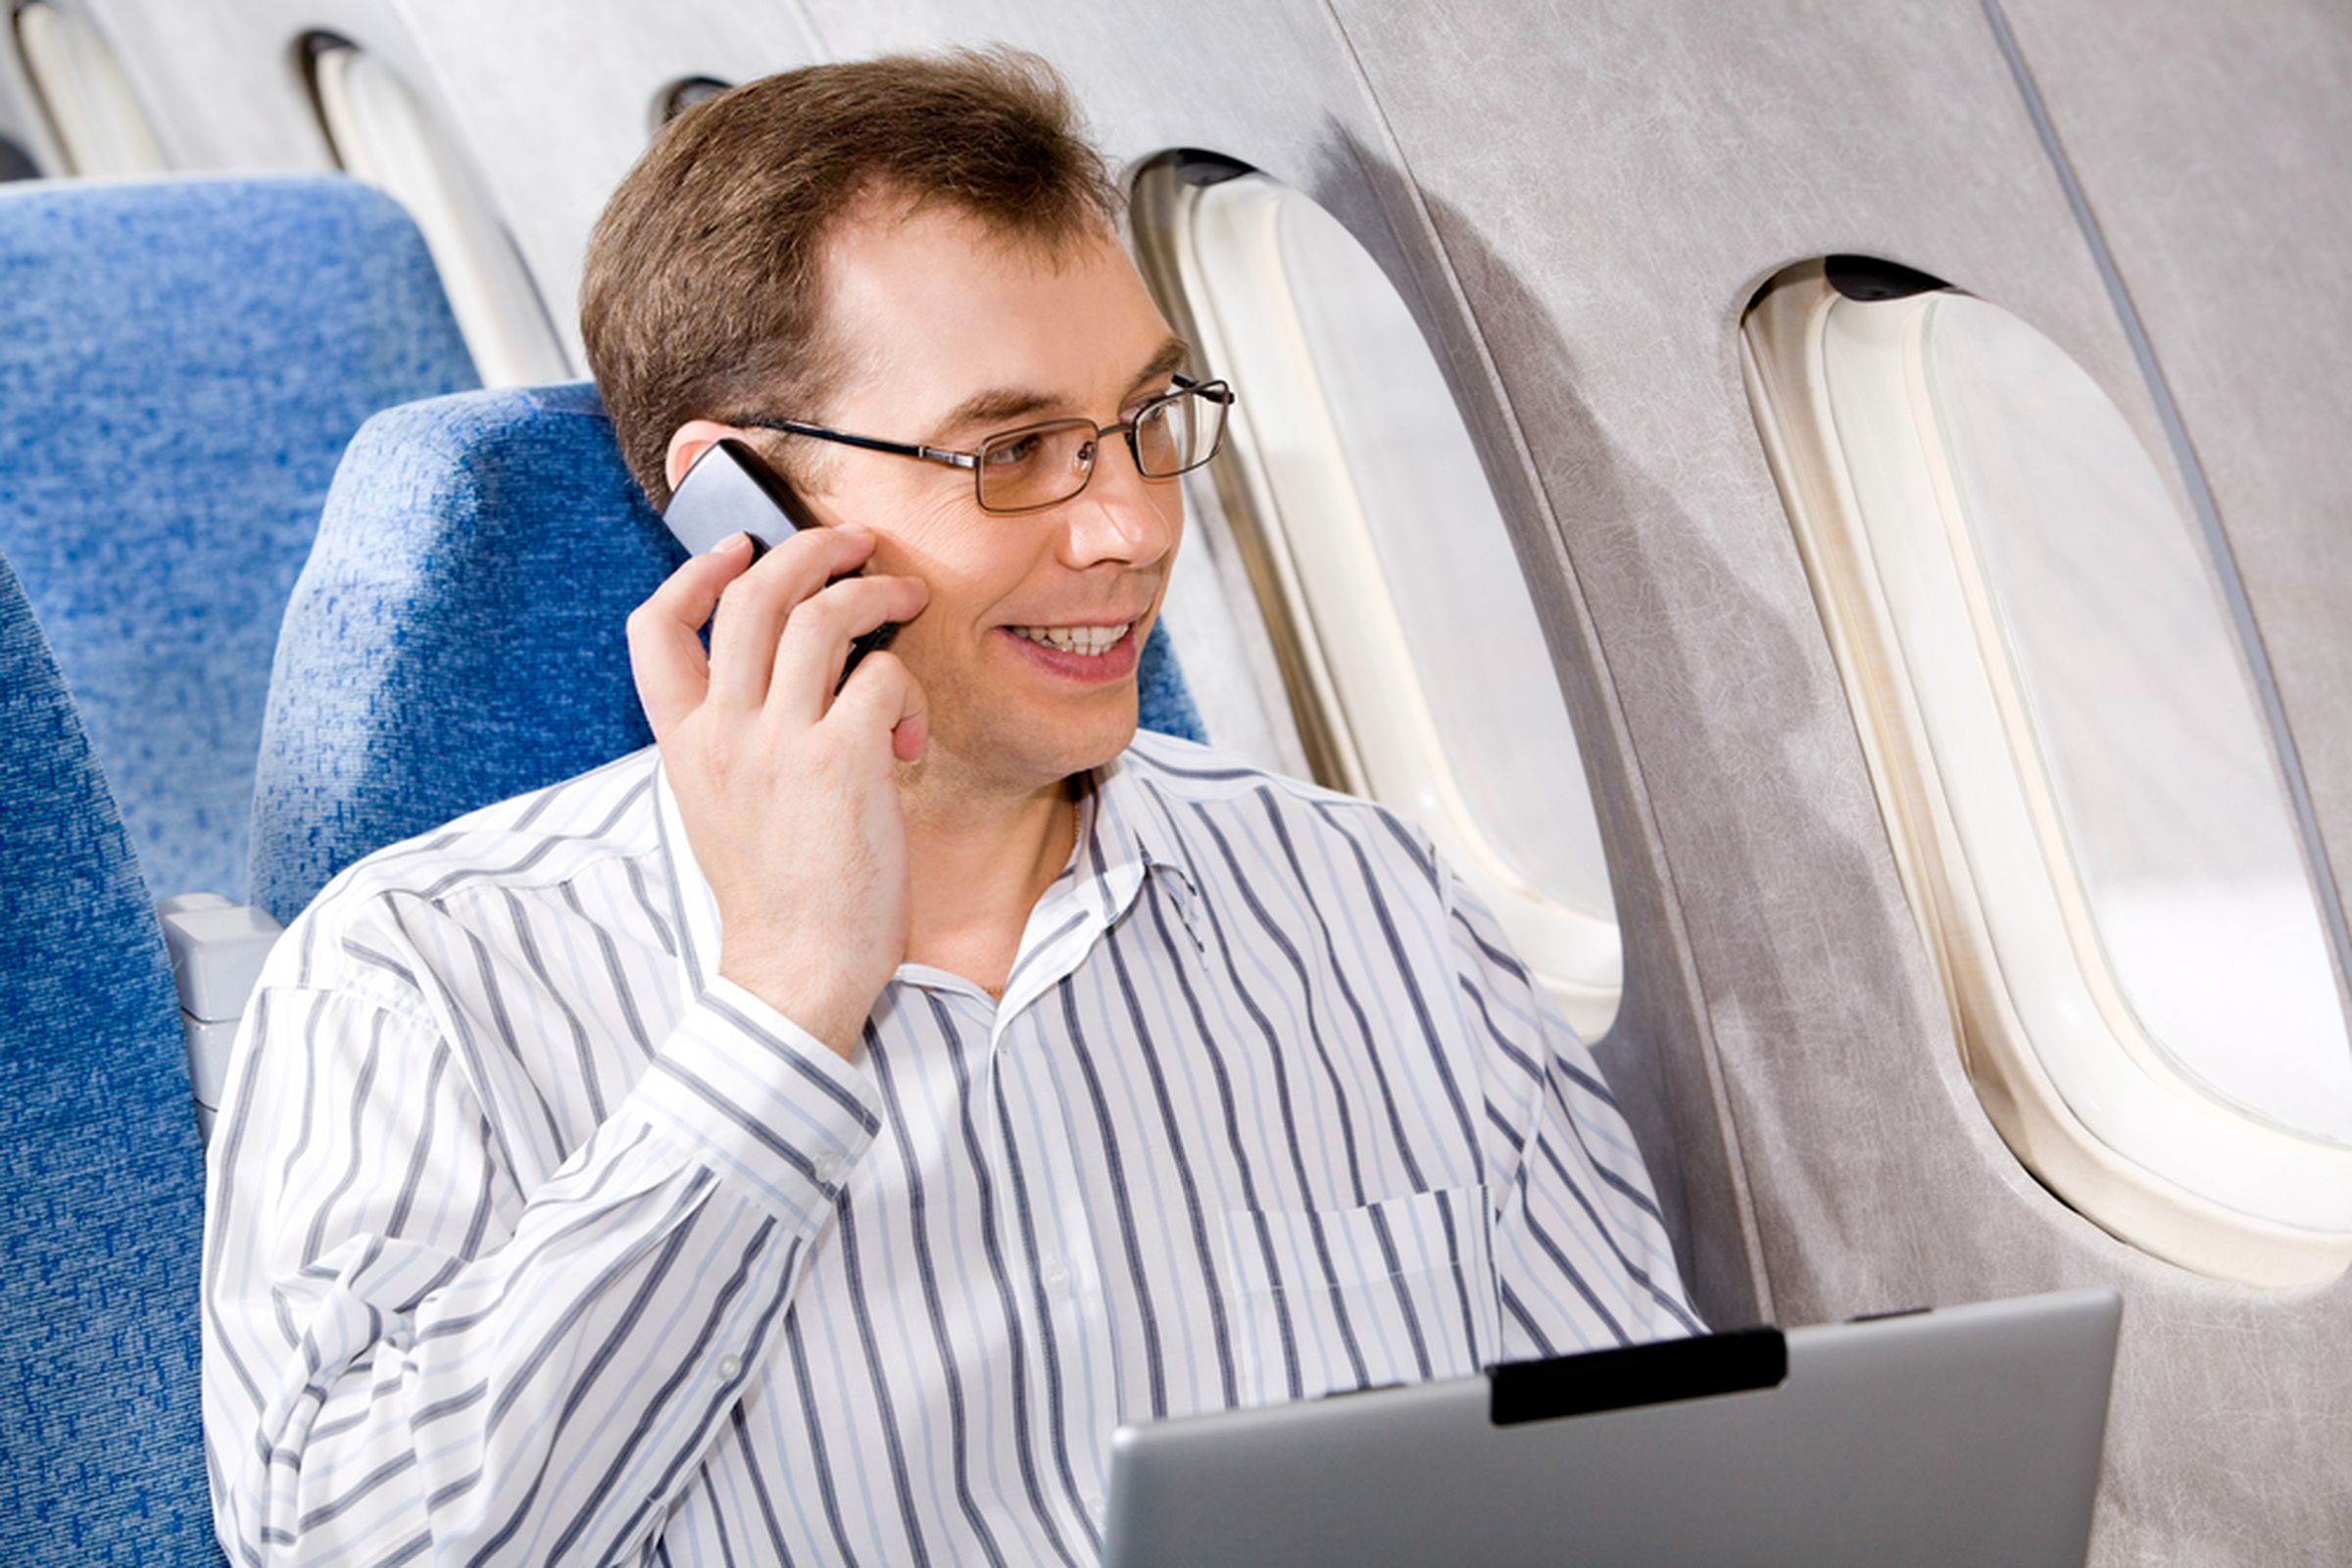 Man on cellphone in plane http://www.shutterstock.com/pic-6689698/stock-photo-portrait-of-business-man-calling-by-phone-in-the-airplane.html